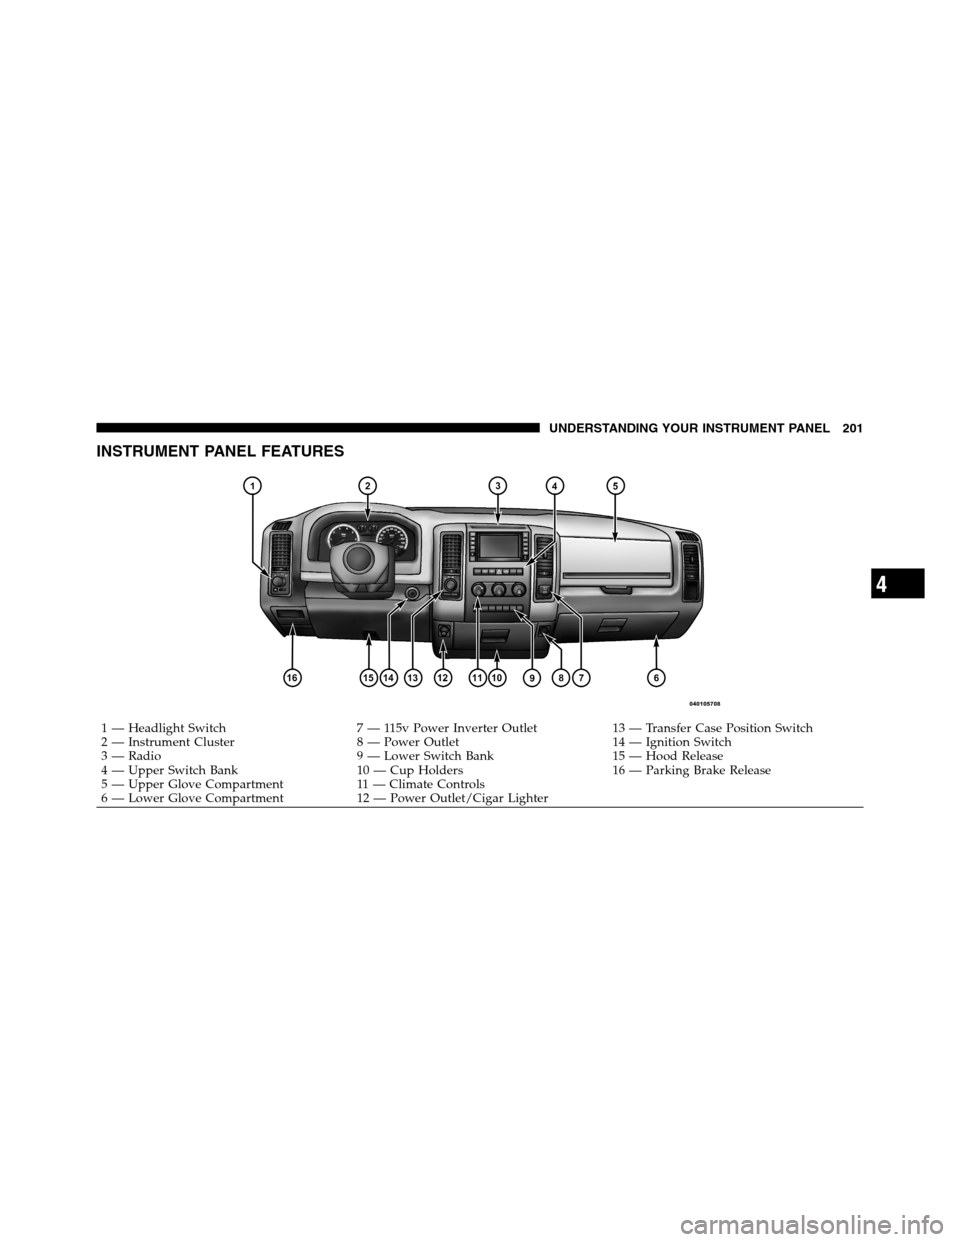 Ram 3500 2011  Owners Manual INSTRUMENT PANEL FEATURES
1 — Headlight Switch 7 — 115v Power Inverter Outlet 13 — Transfer Case Position Switch
2 — Instrument Cluster 8 — Power Outlet 14 — Ignition Switch
3 — Radio 9 